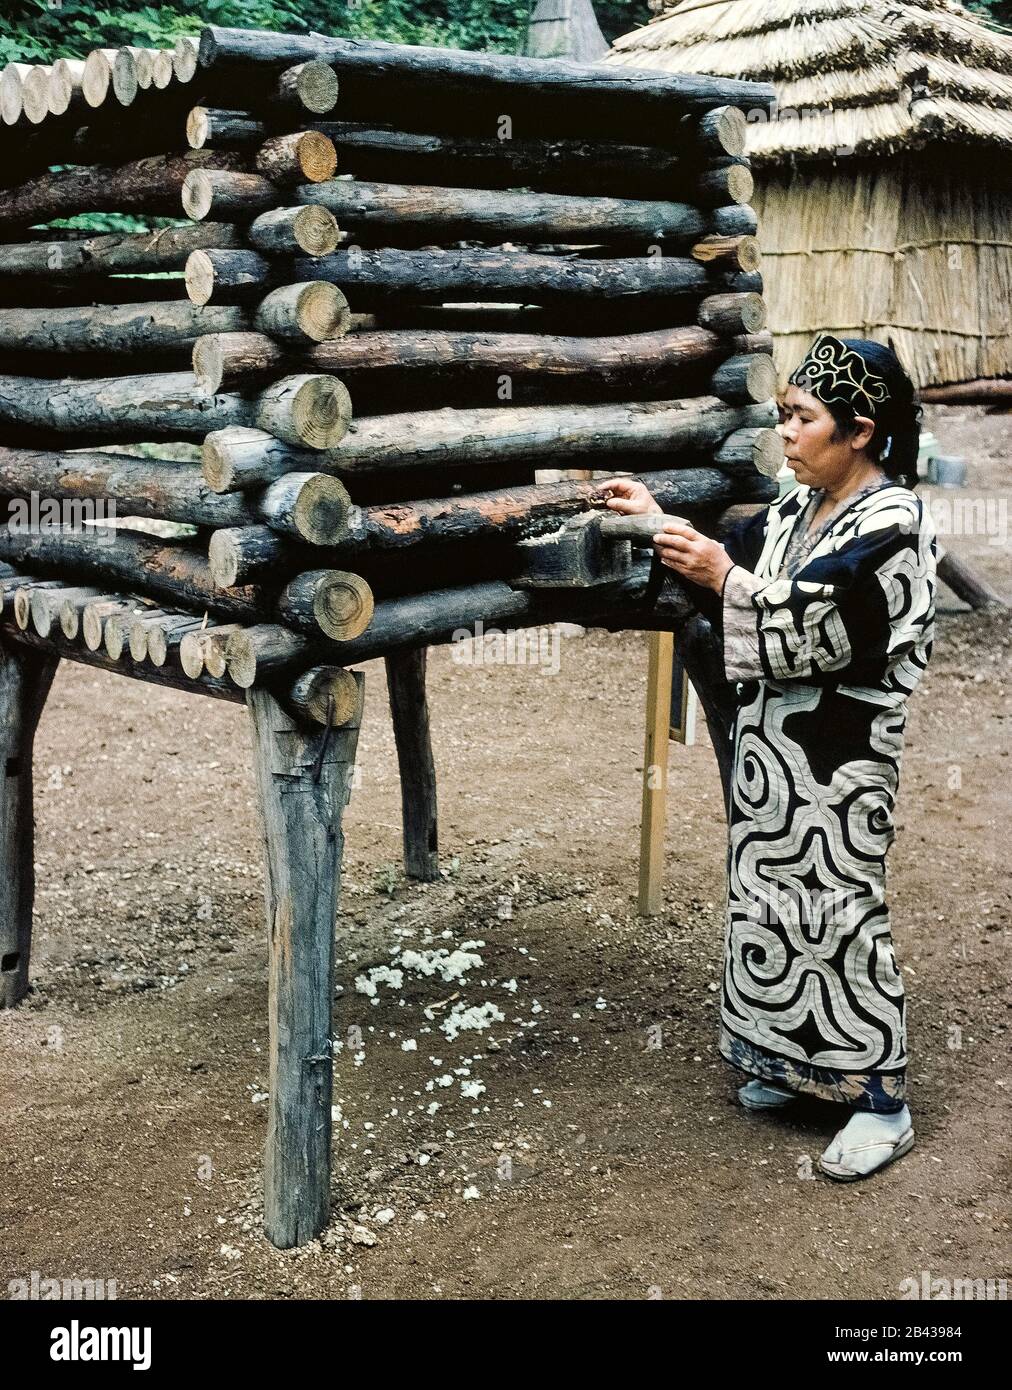 An Ainu woman in traditional dress feeds rice to a black bear being raised in an elevated log cage in an Ainu village on the island of Hokkaido in northern Japan. The Ainu (pronounced I-noo) worship the bear as their most revered god. Prior to when this historical photograph was taken in 1962, bears raised in the village would be slaughtered during an annual festival. Bear festivals continue today for tourists but the animal is no longer sacrificed. The Ainu were officially recognized as indigenous people of Japan in 2008. Stock Photo